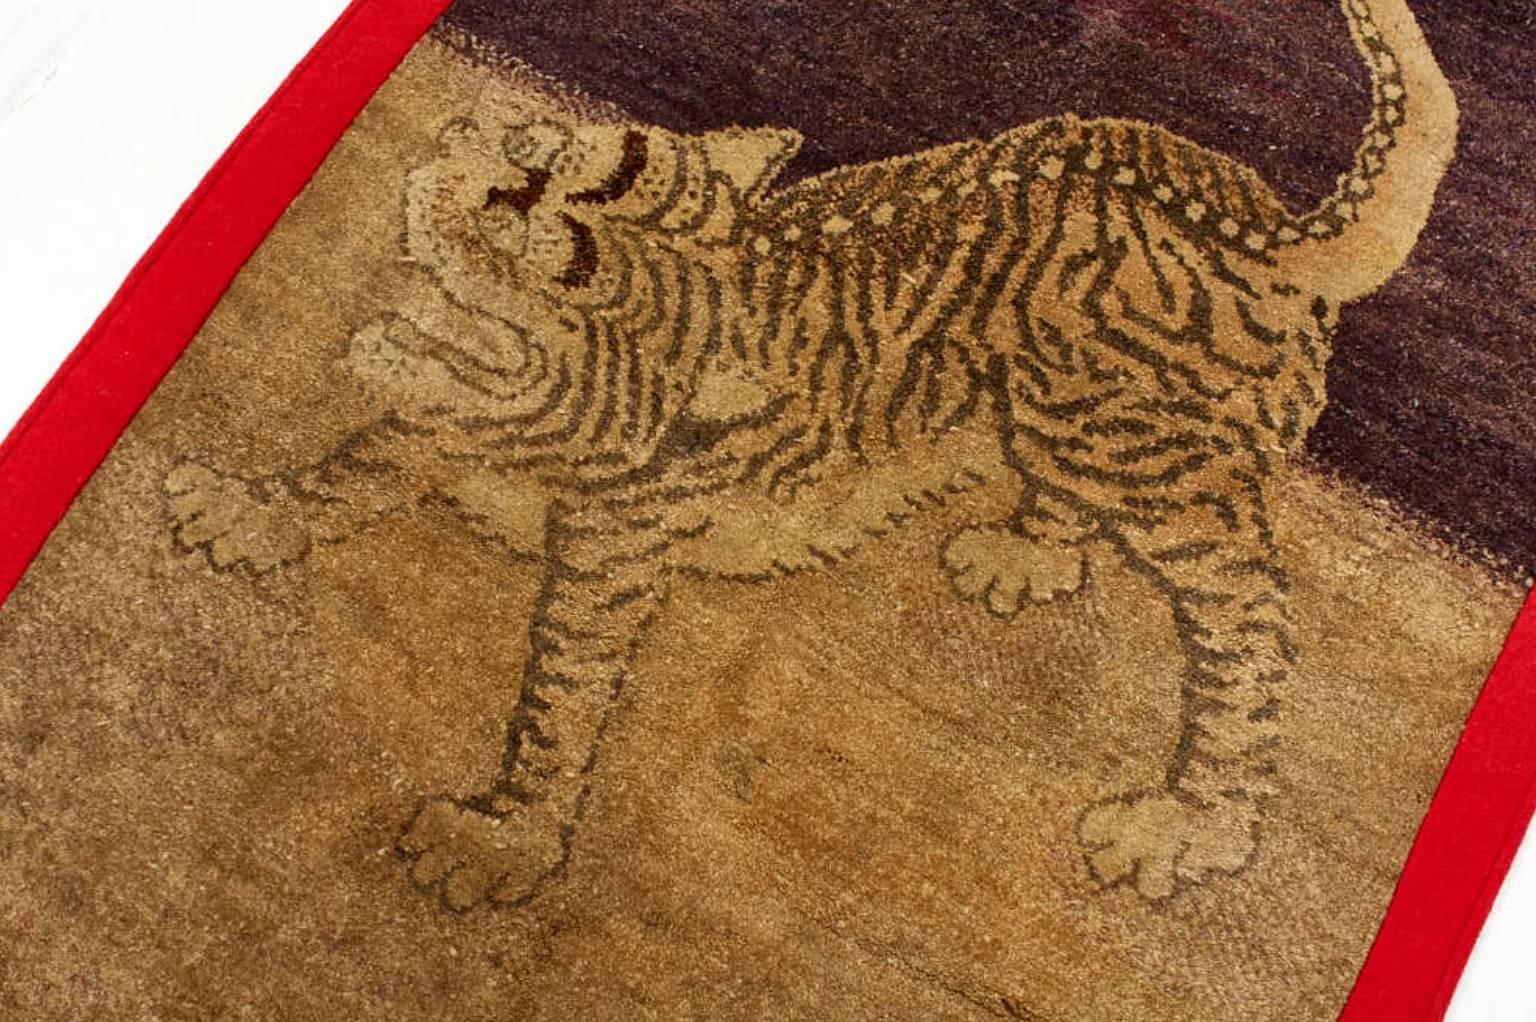 Individually selected by Madeline during her travels, this hand-knotted rug from Nepal features a Tibetan tiger in earthy hues and bold crimson border.